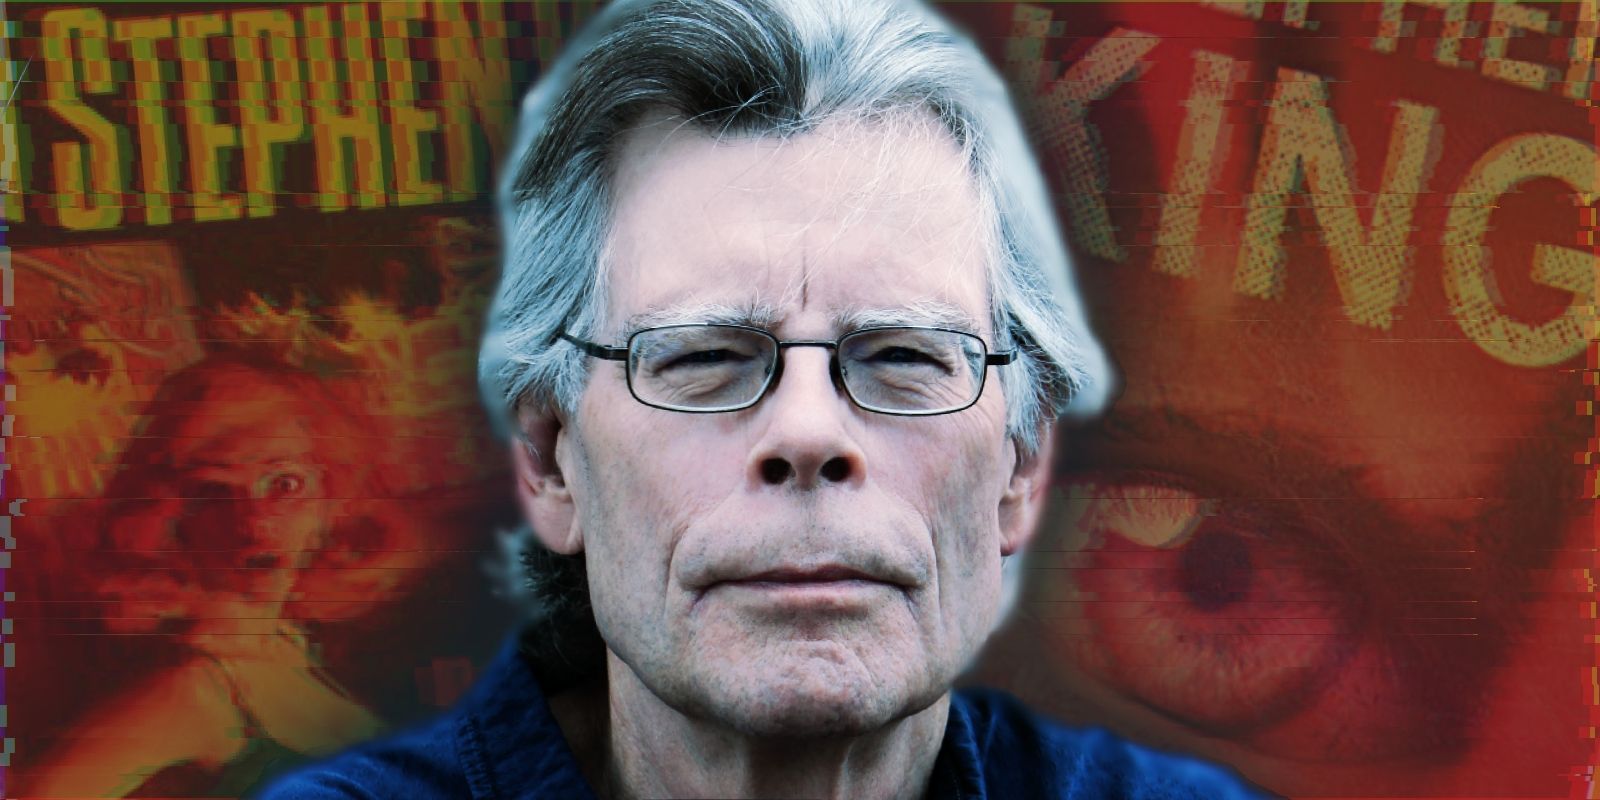 Stephen King in front of two unadapted book covers, Joyland and Insomnia